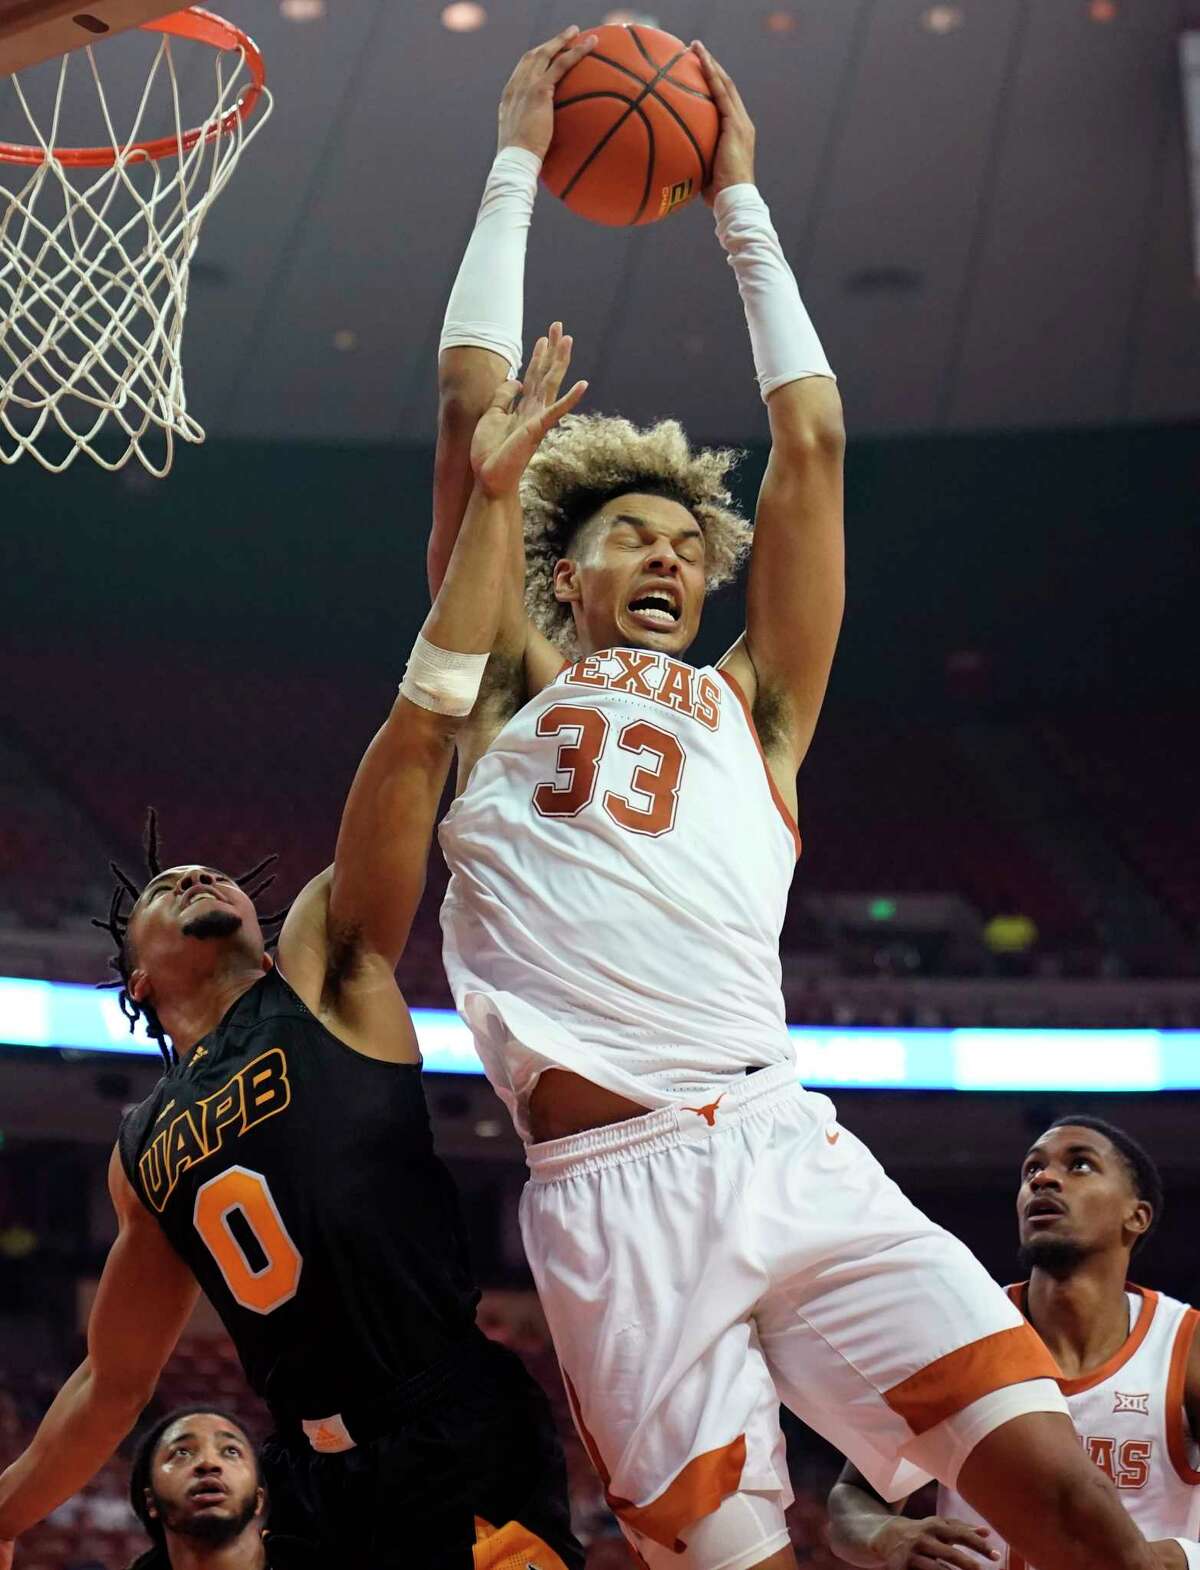 Texas forward Tre Mitchell (33) grabs a rebound over Arkansas-Pine Bluff guard Kshun Stokes (0) during the second half of an NCAA college basketball game, Tuesday, Dec. 14, 2021, in Austin, Texas. (AP Photo/Eric Gay)